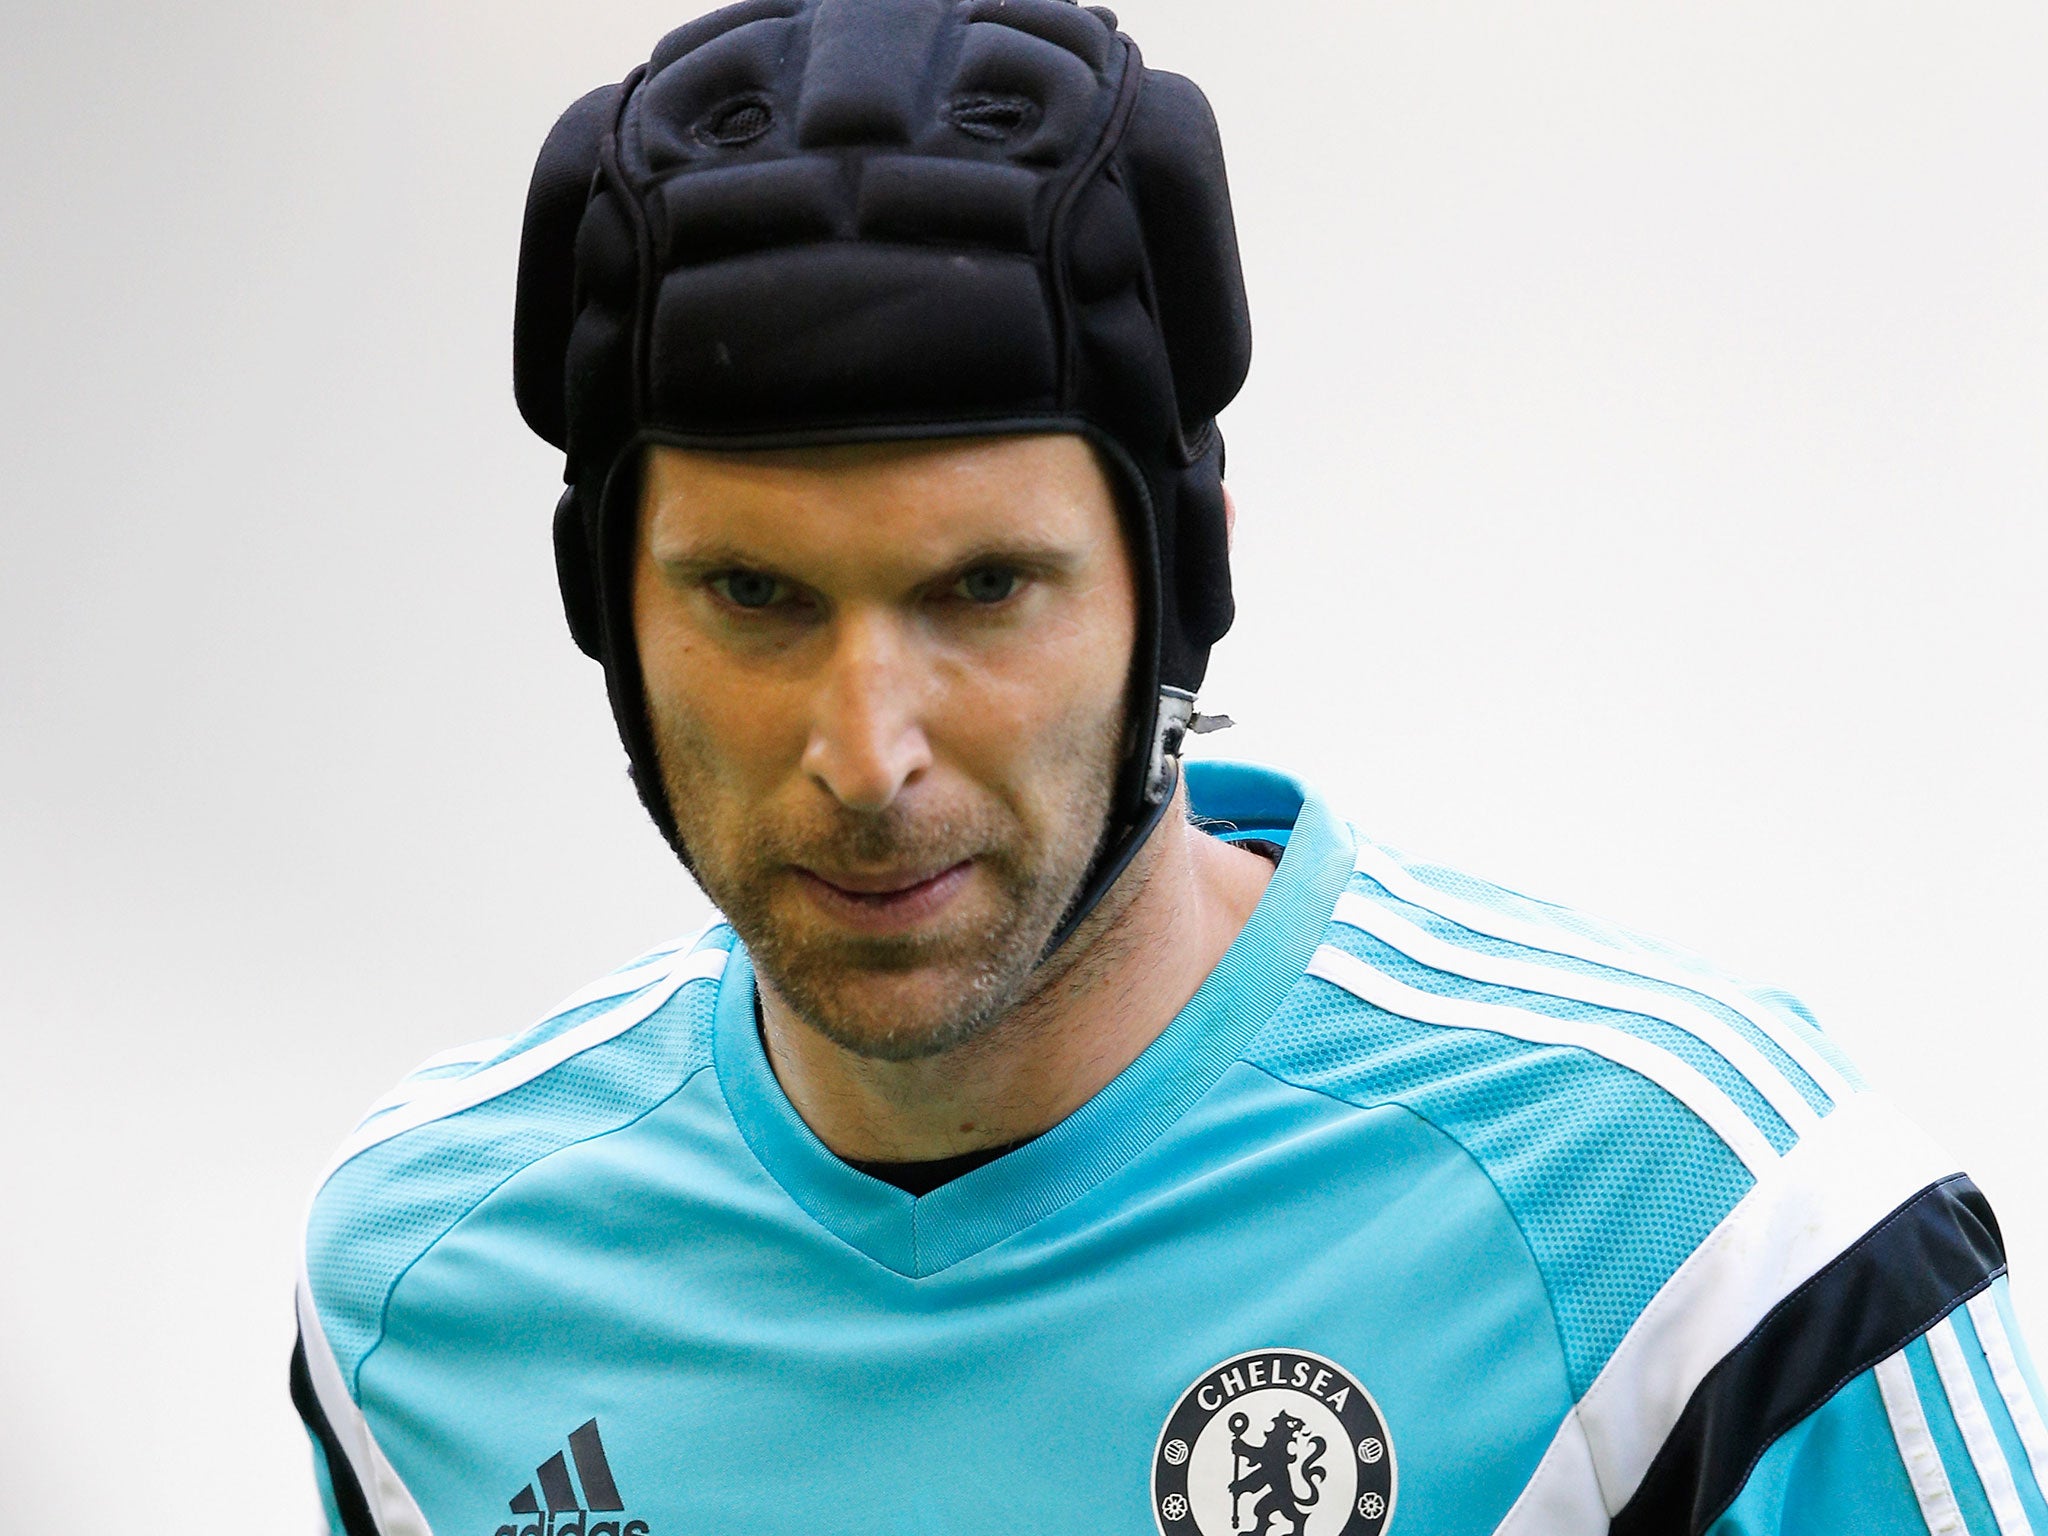 Petr Cech has lost his place to Thibaut Courtois